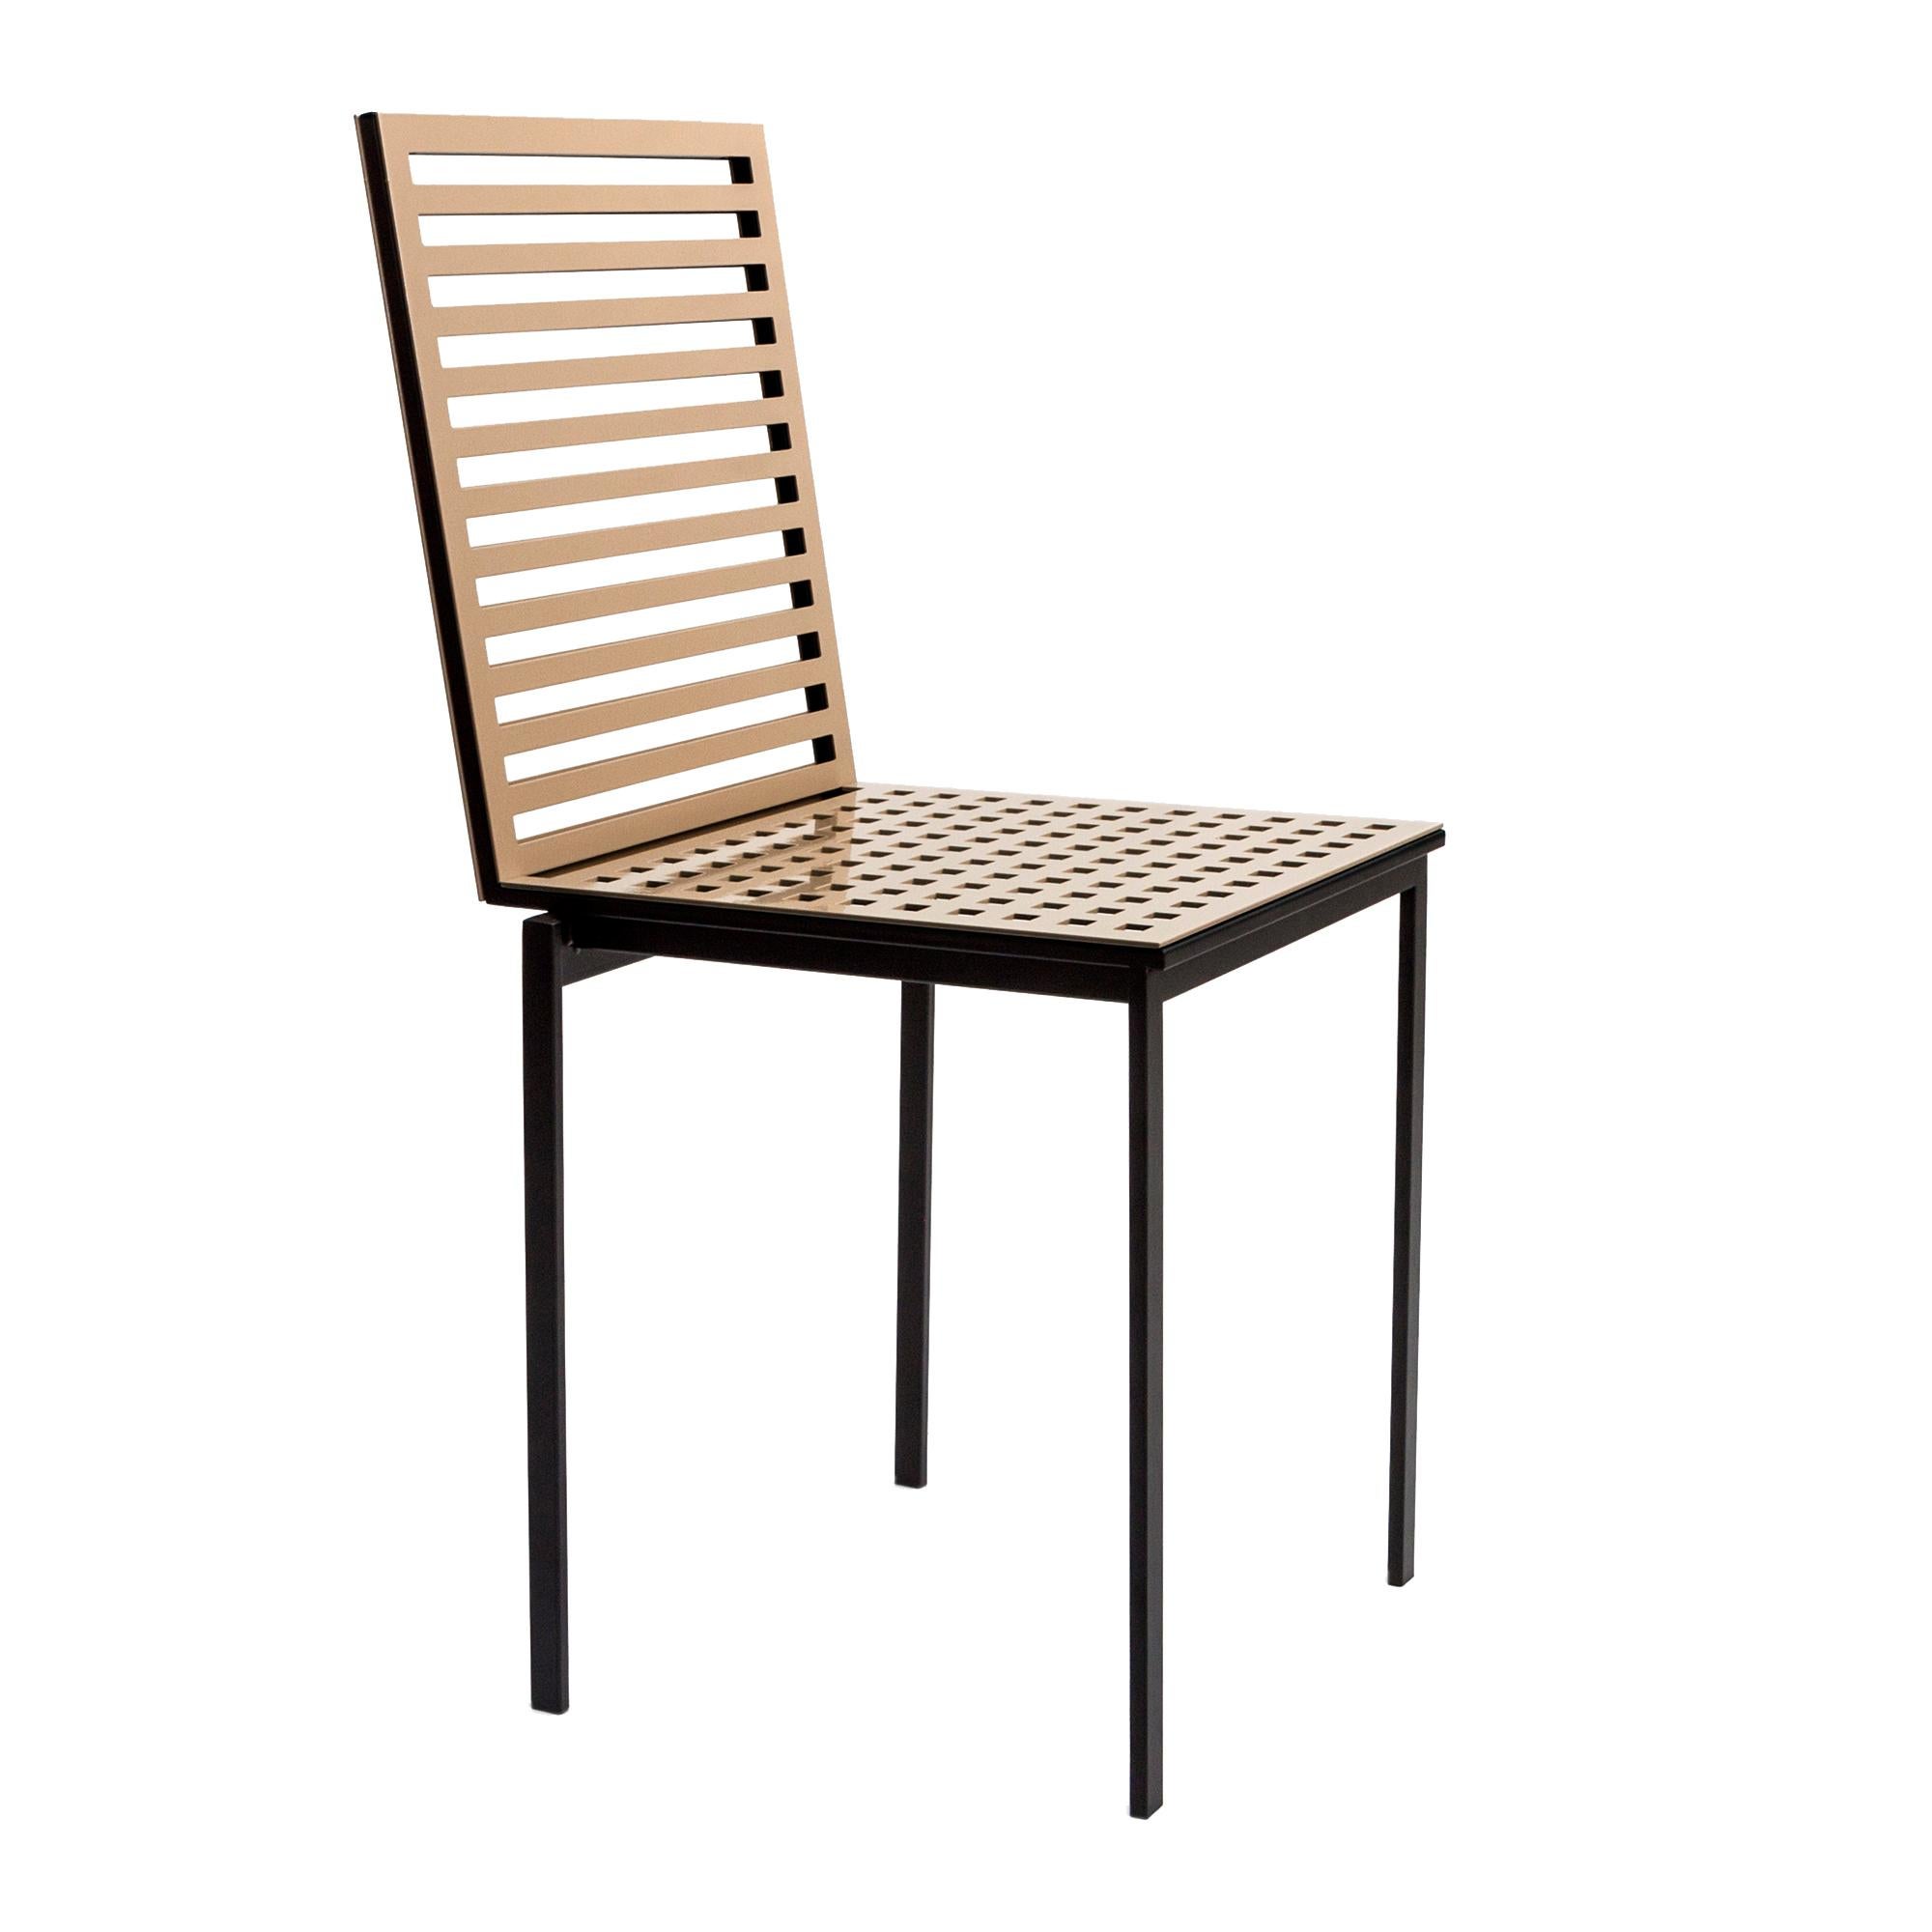 Italian Contemporary Tanit Classic Chair in Beige Colored Aluminum For Sale